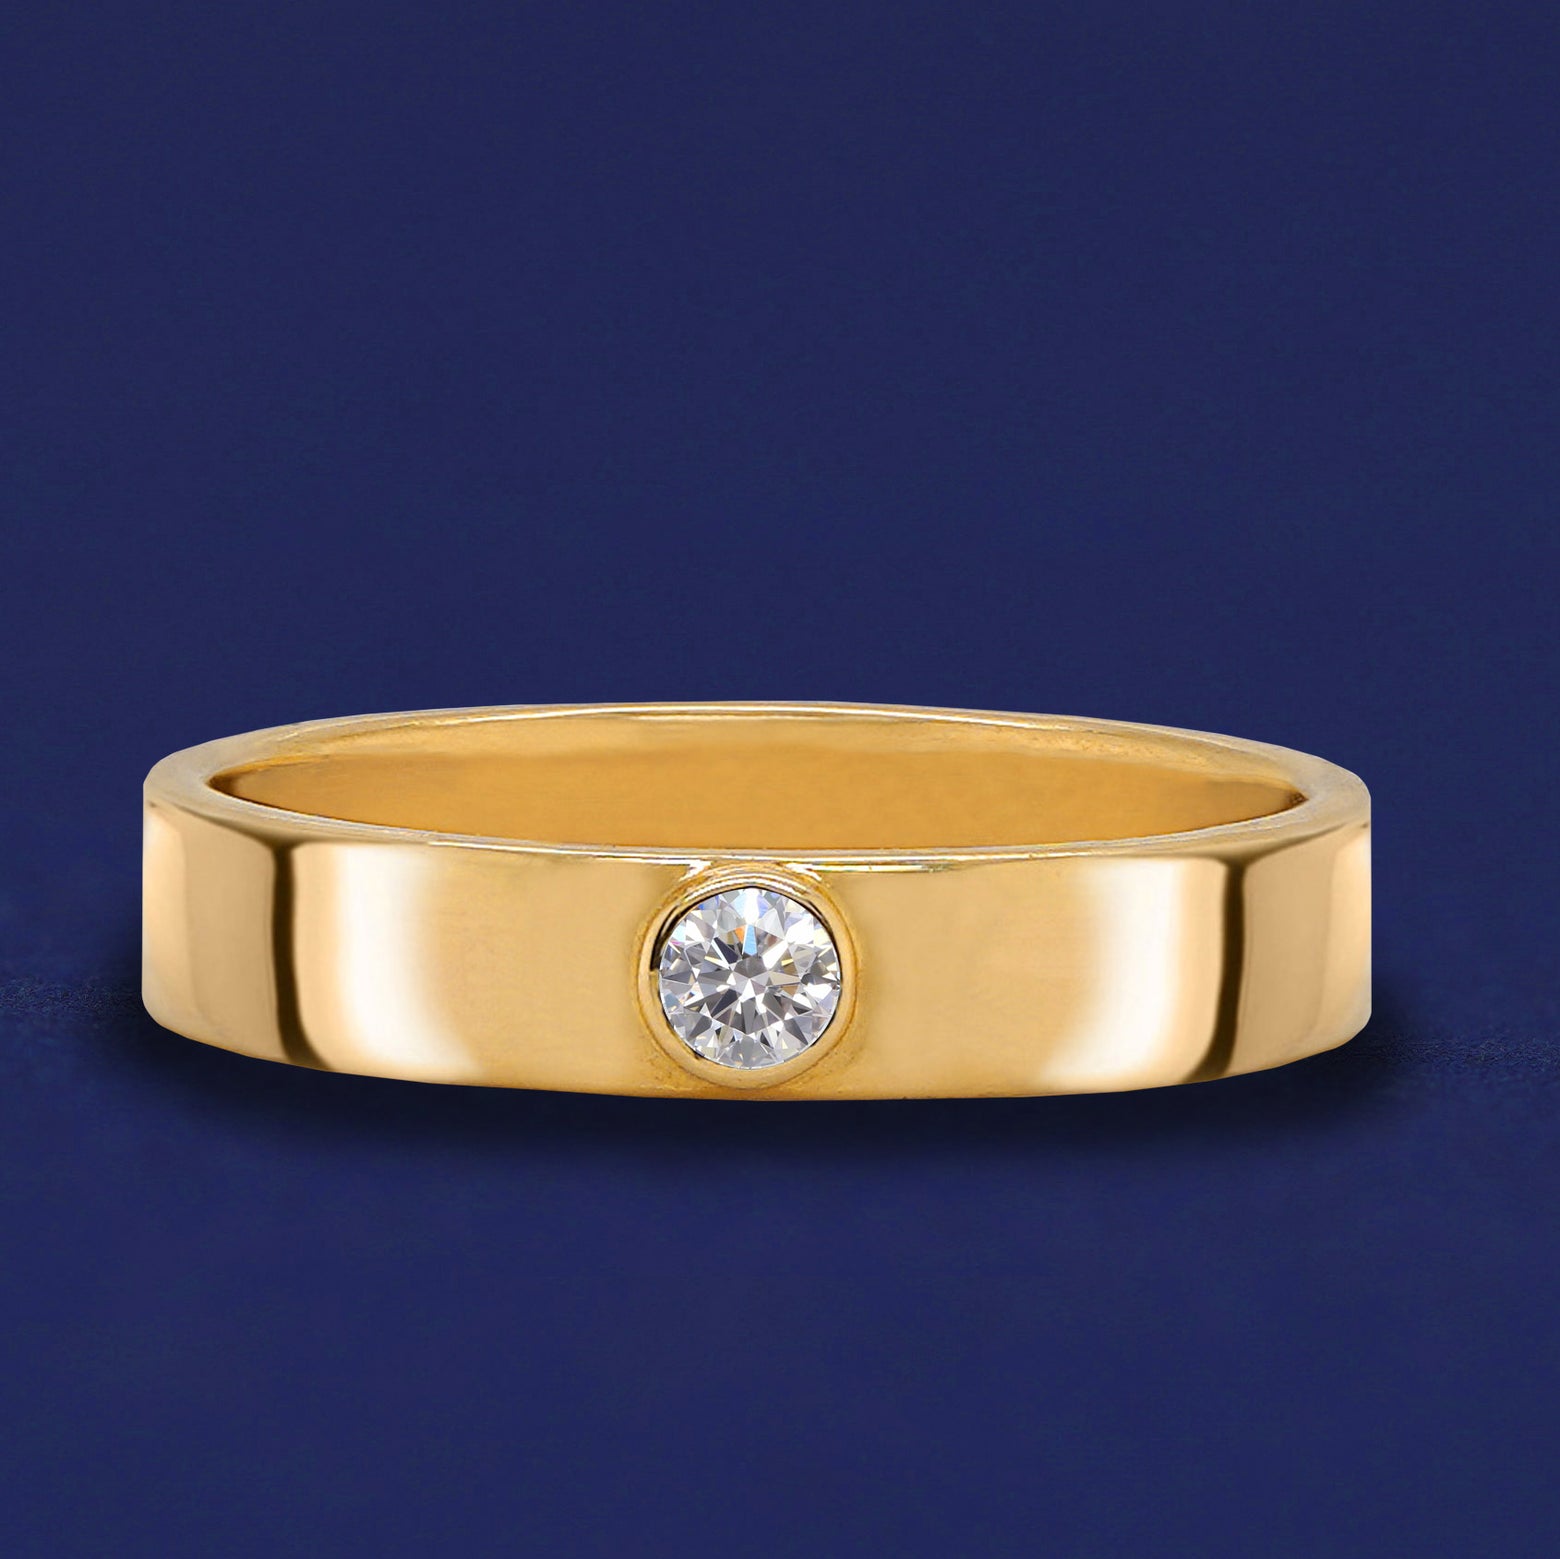 A 14 karat solid gold band ring with a bezel set Diamond on a dark blue background